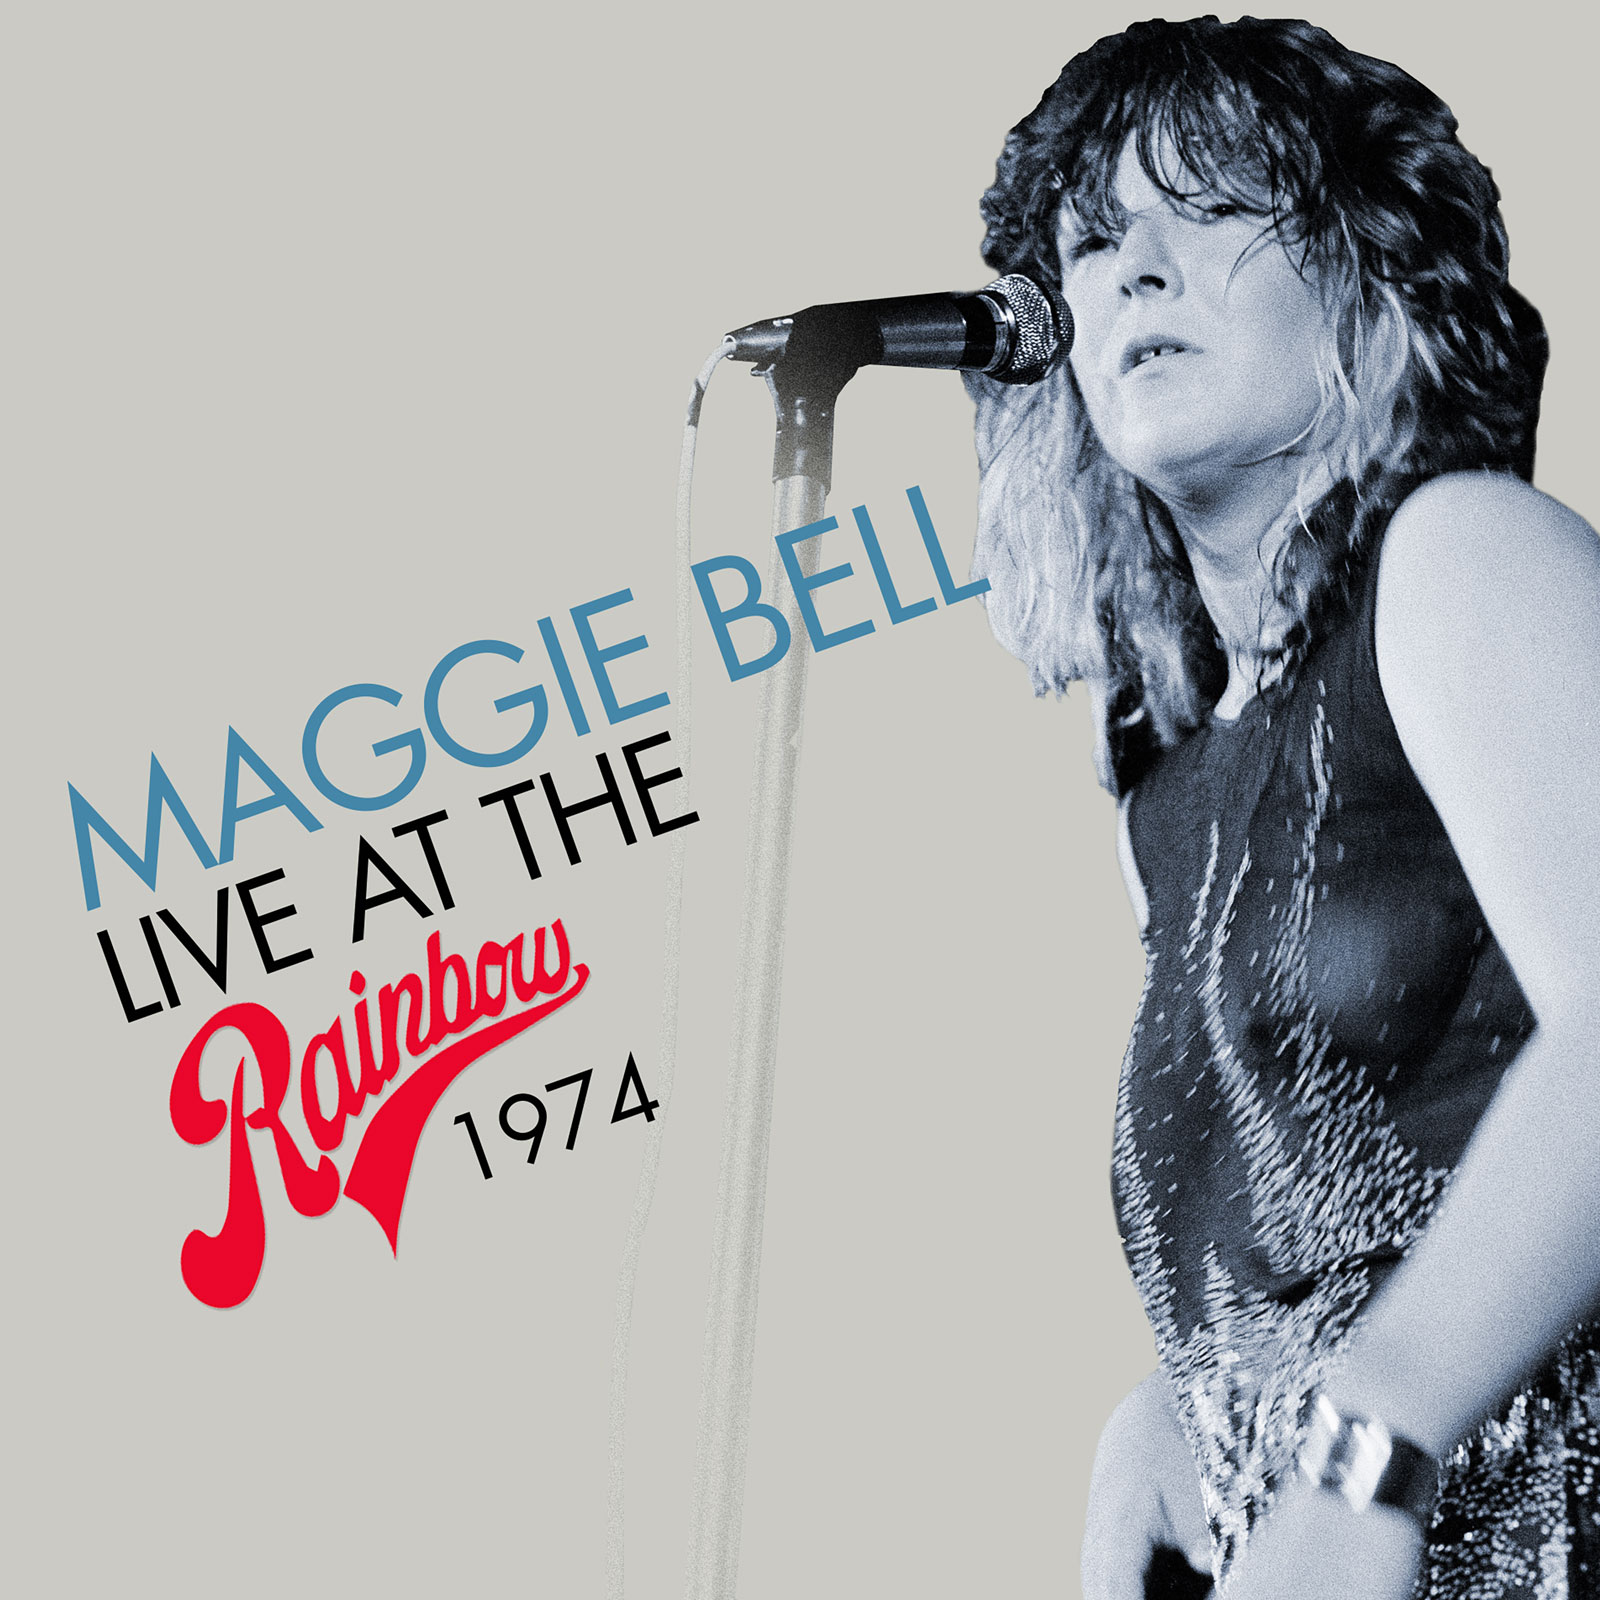 Maggie Bell – Live At The Rainbow